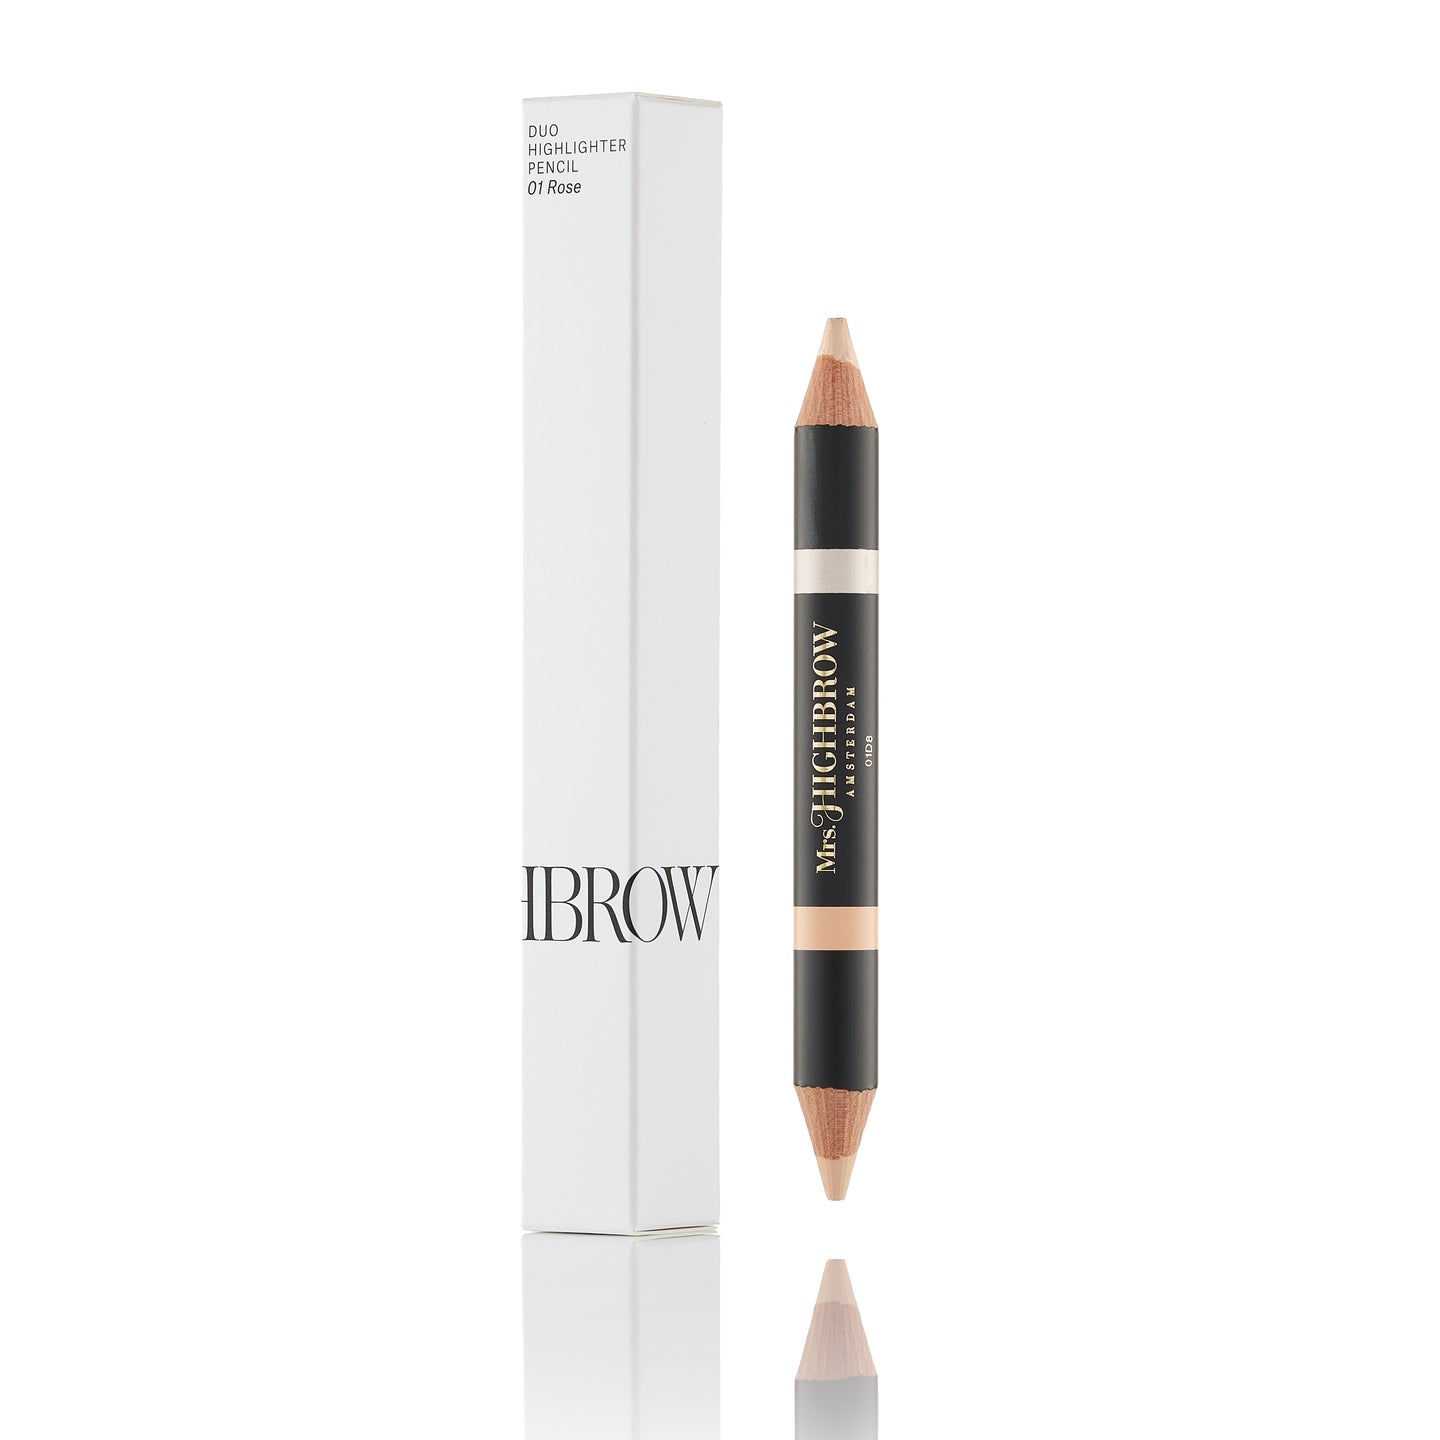 Mrs.Highbrow Dual Duo Highlighter pencil brows eyebrows